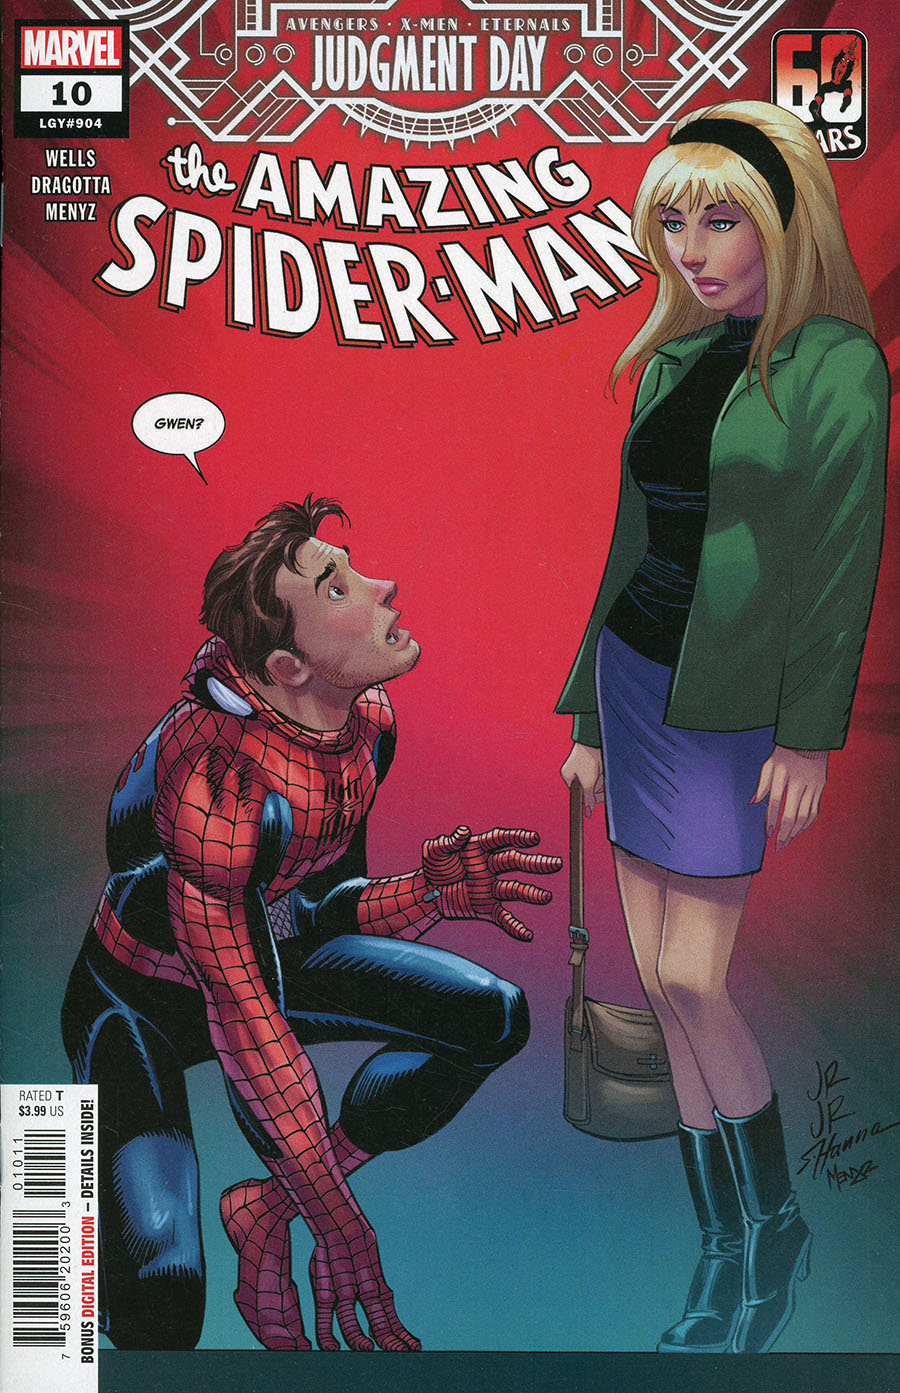 Amazing Spider-Man Vol 6 #10 Cover A Regular John Romita Jr Cover (A.X.E. Judgment Day Tie-In)